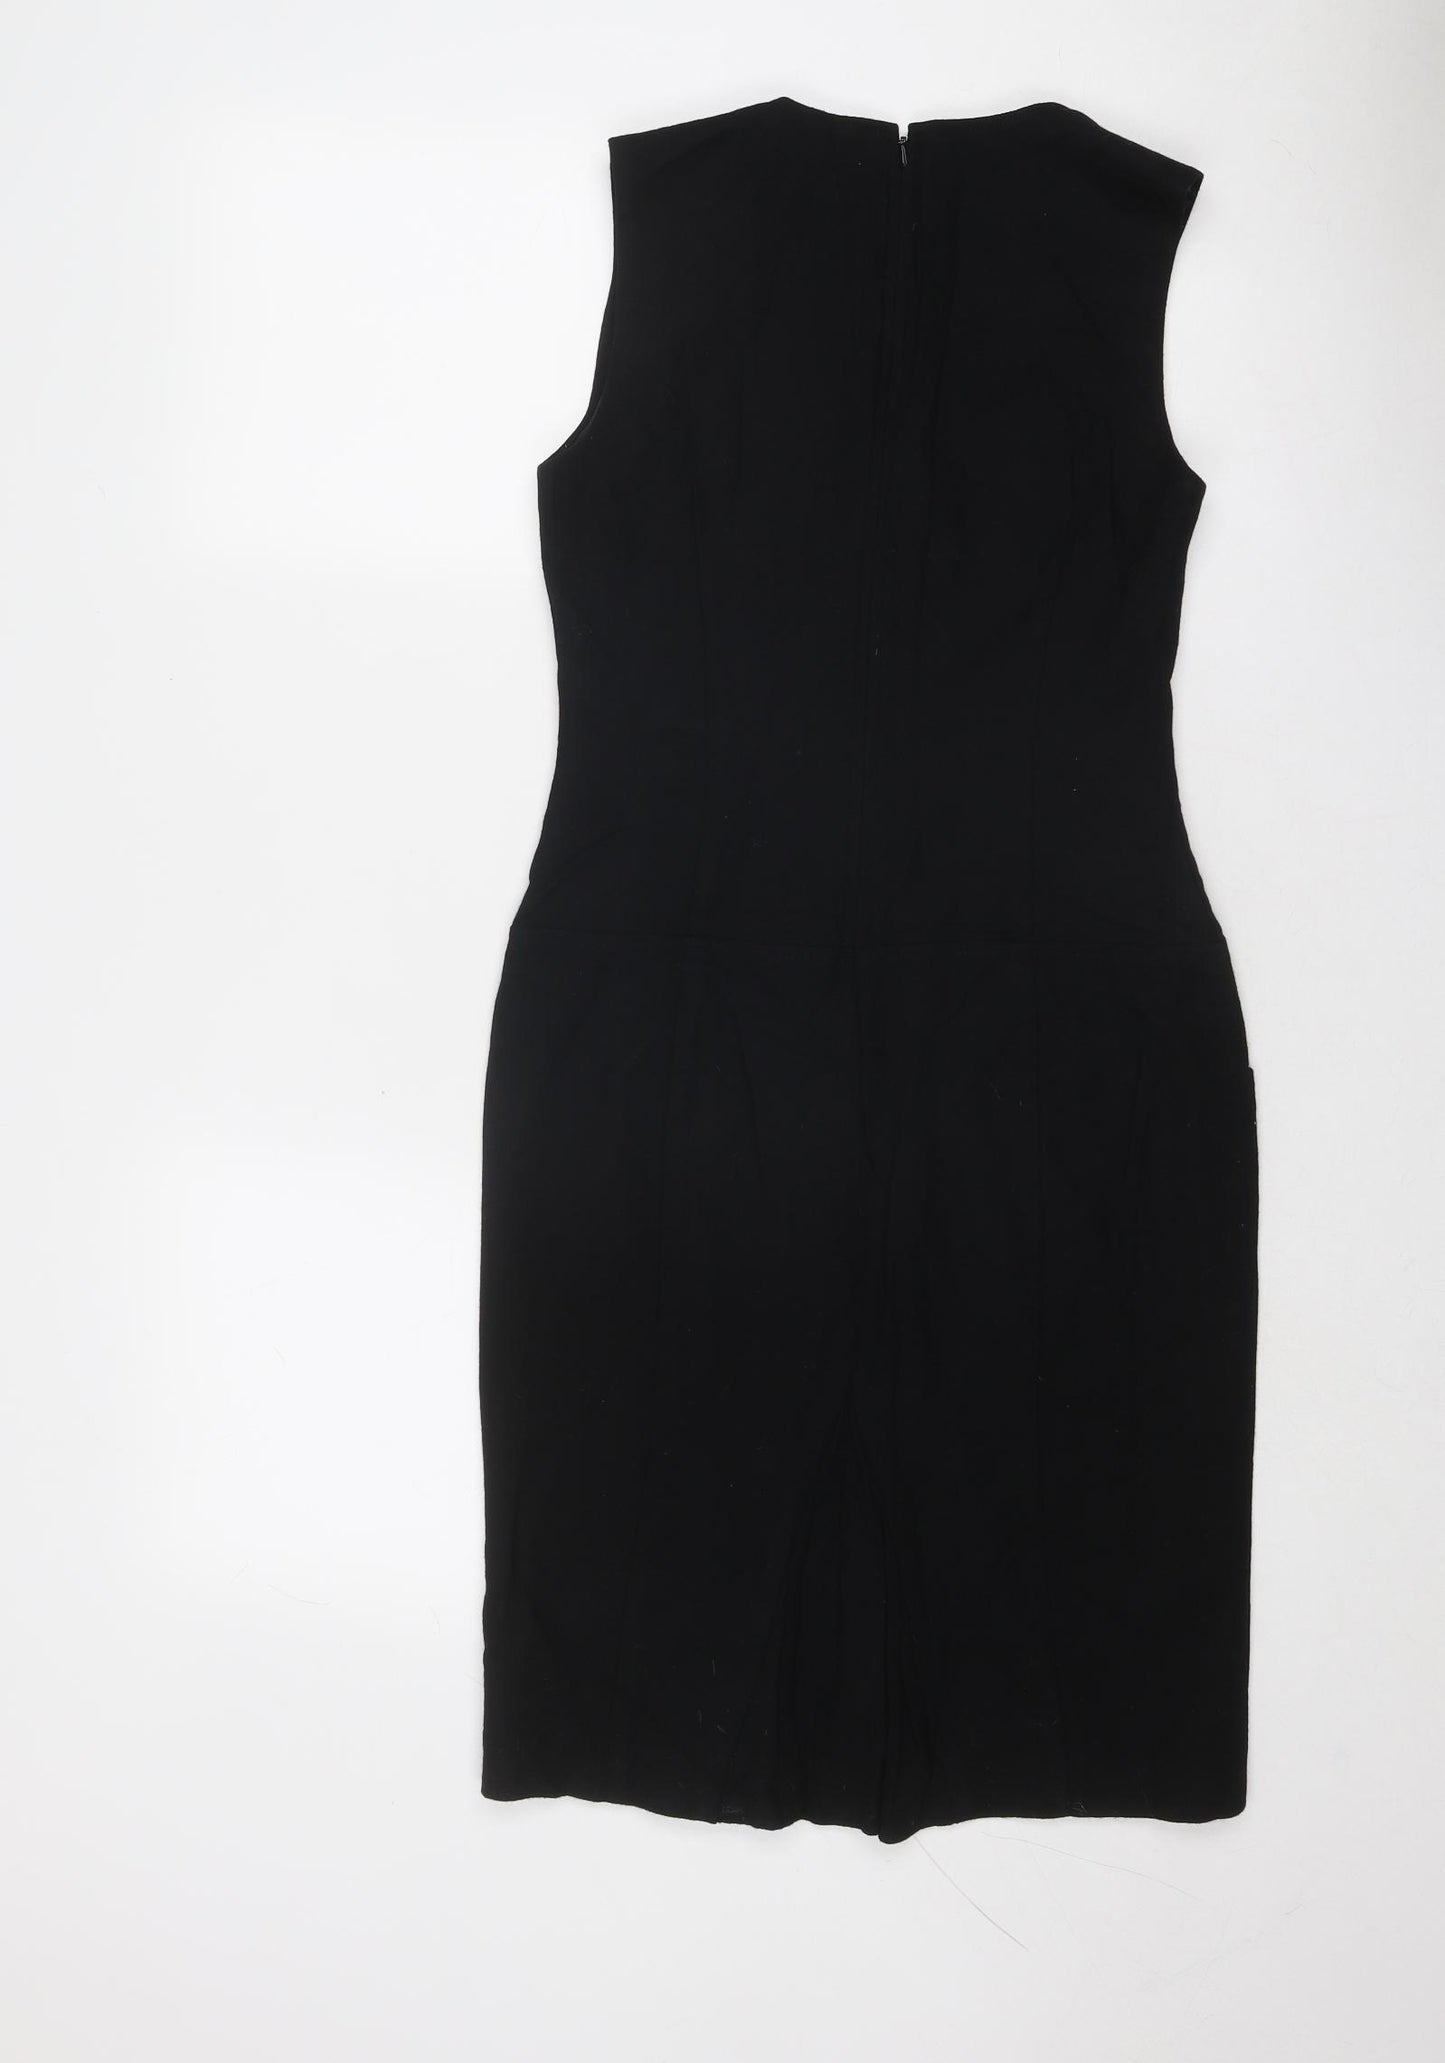 Ted Baker Womens Black Wool Shift Size 8 Round Neck Zip